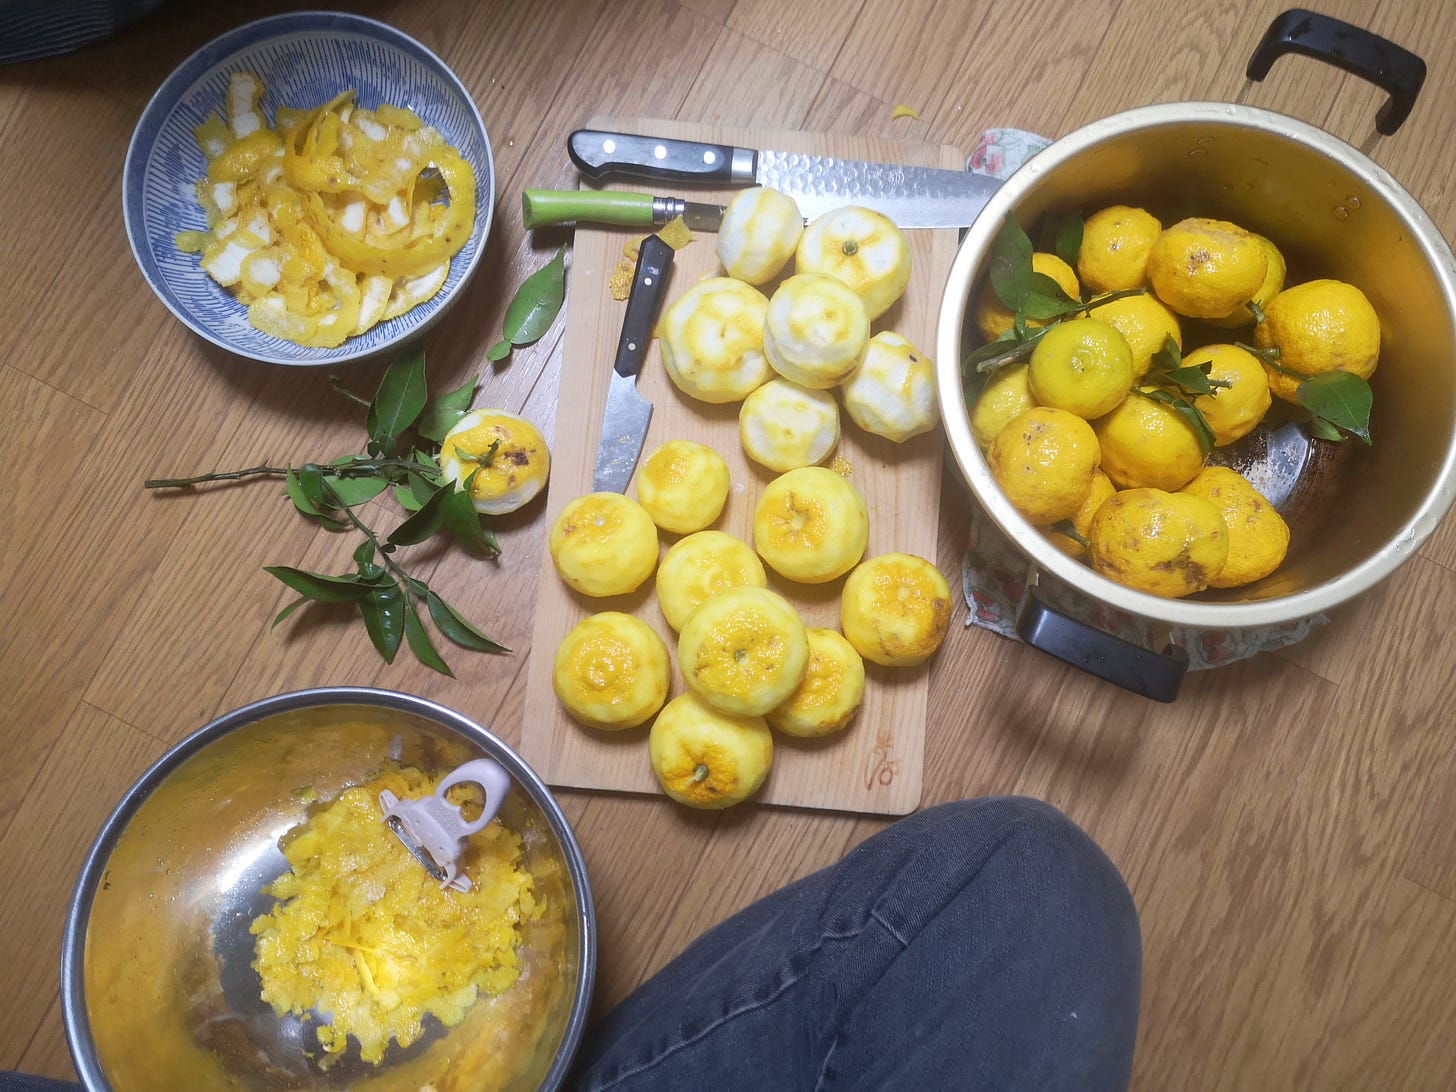 peeled yuzu fruit on a cutting board on the floor, fruit and peels in bowls